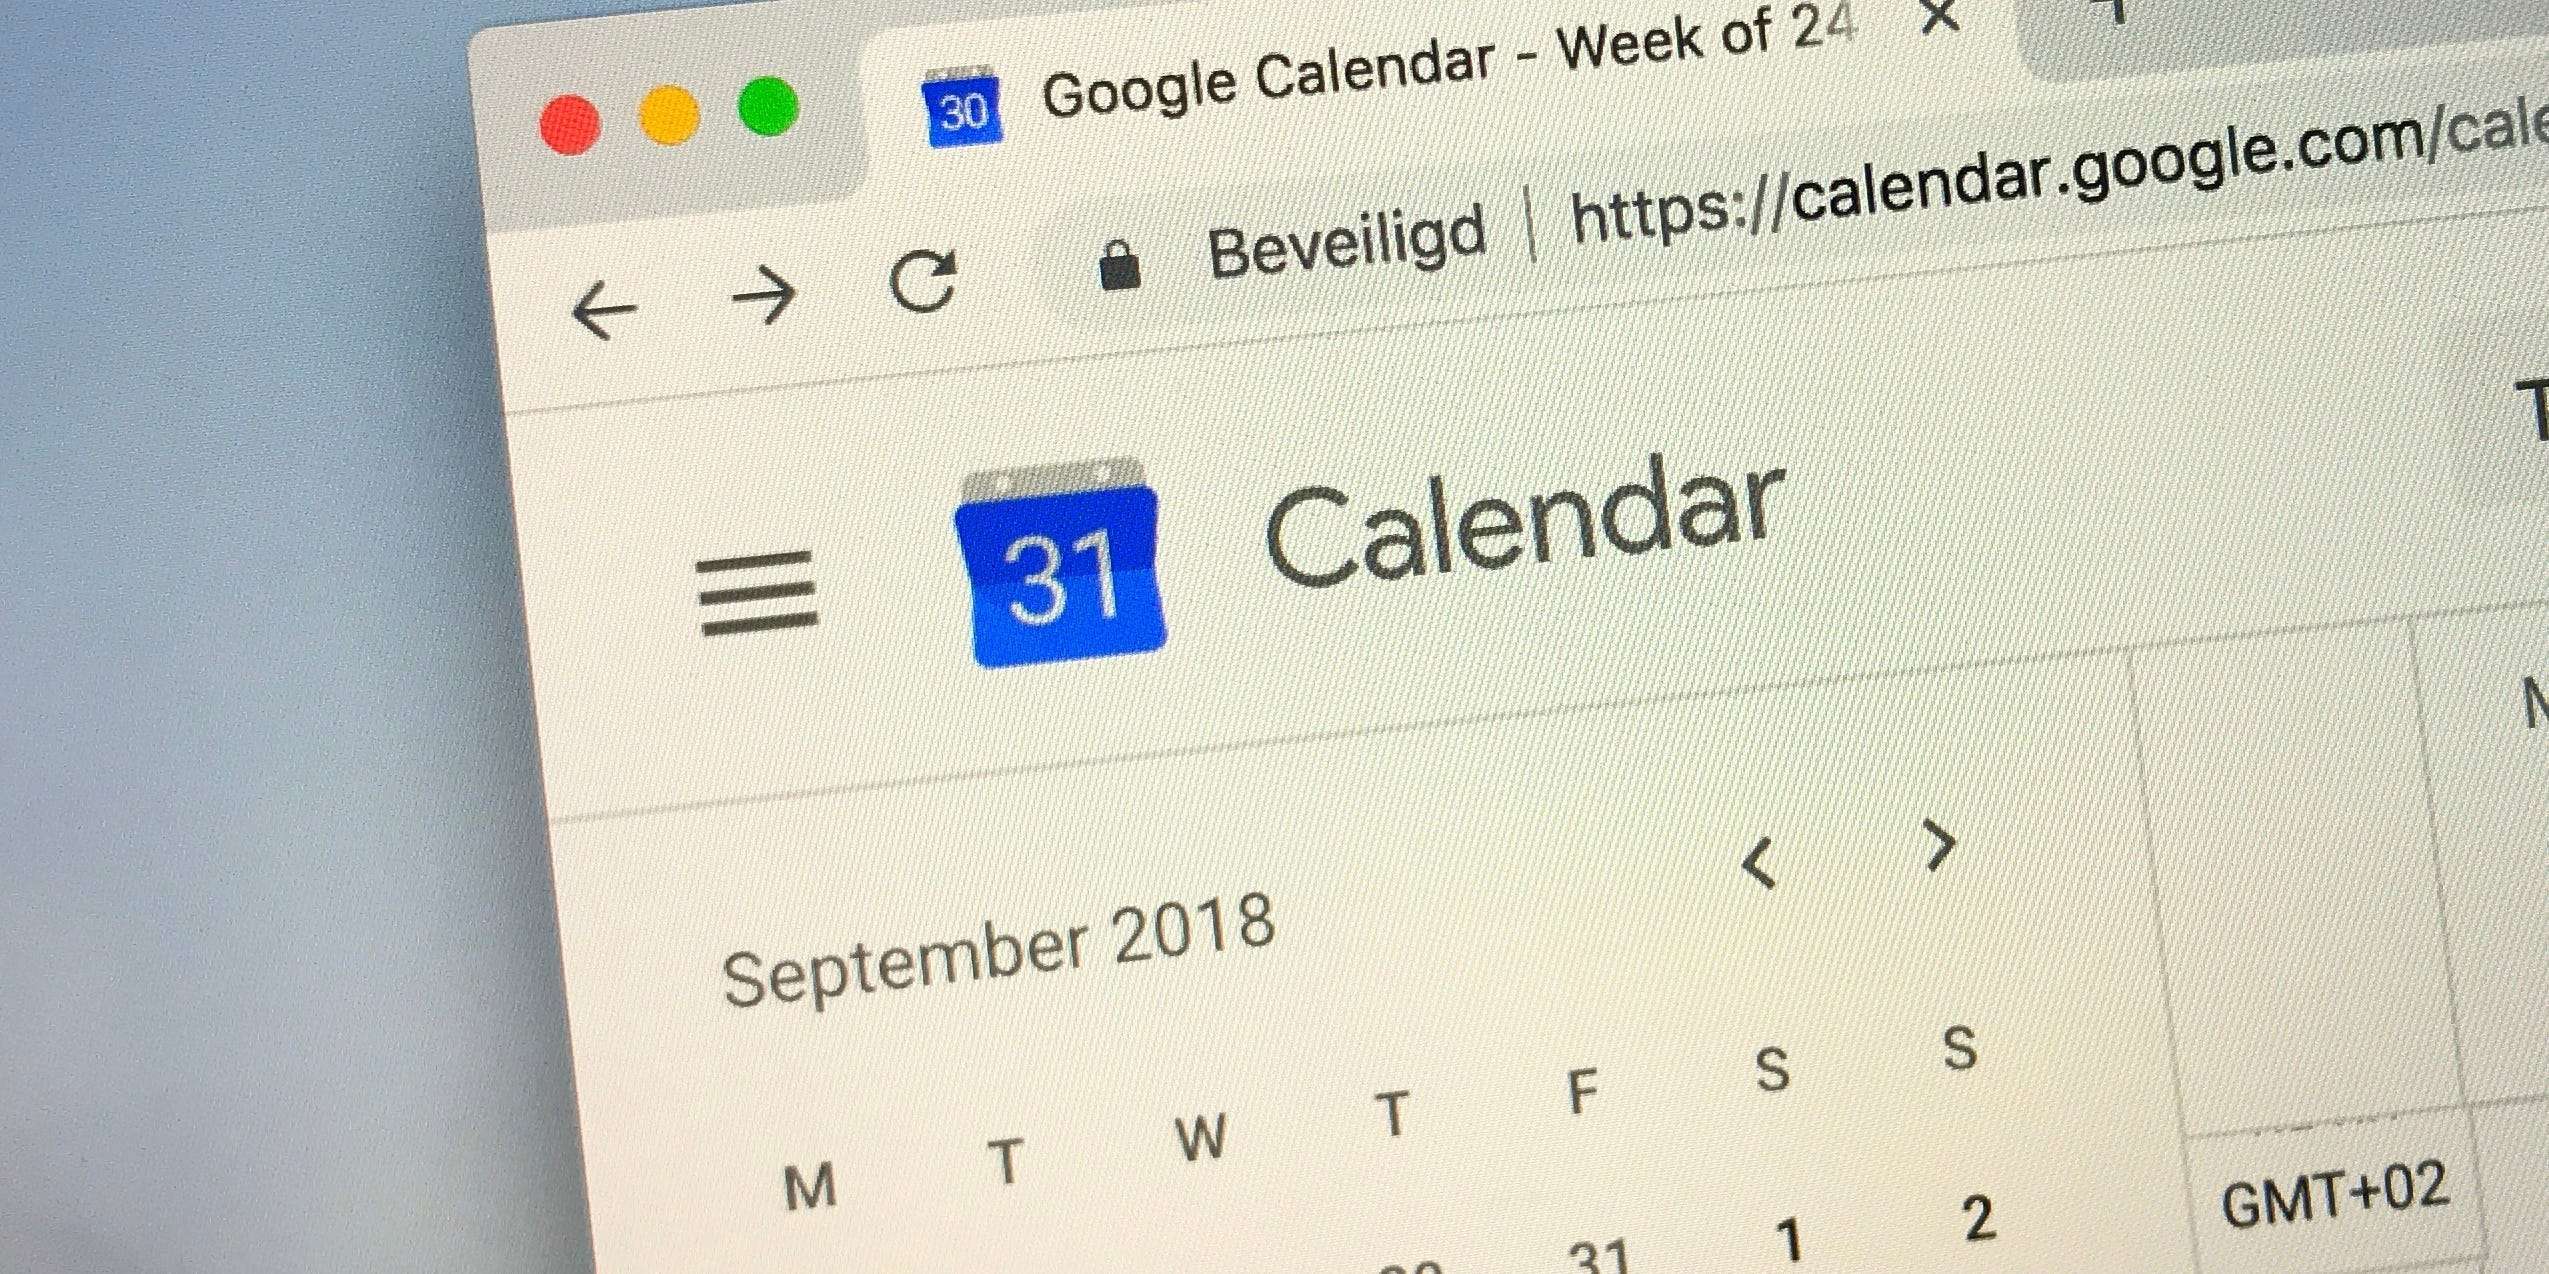 How to reschedule a meeting in your Google Calendar on the